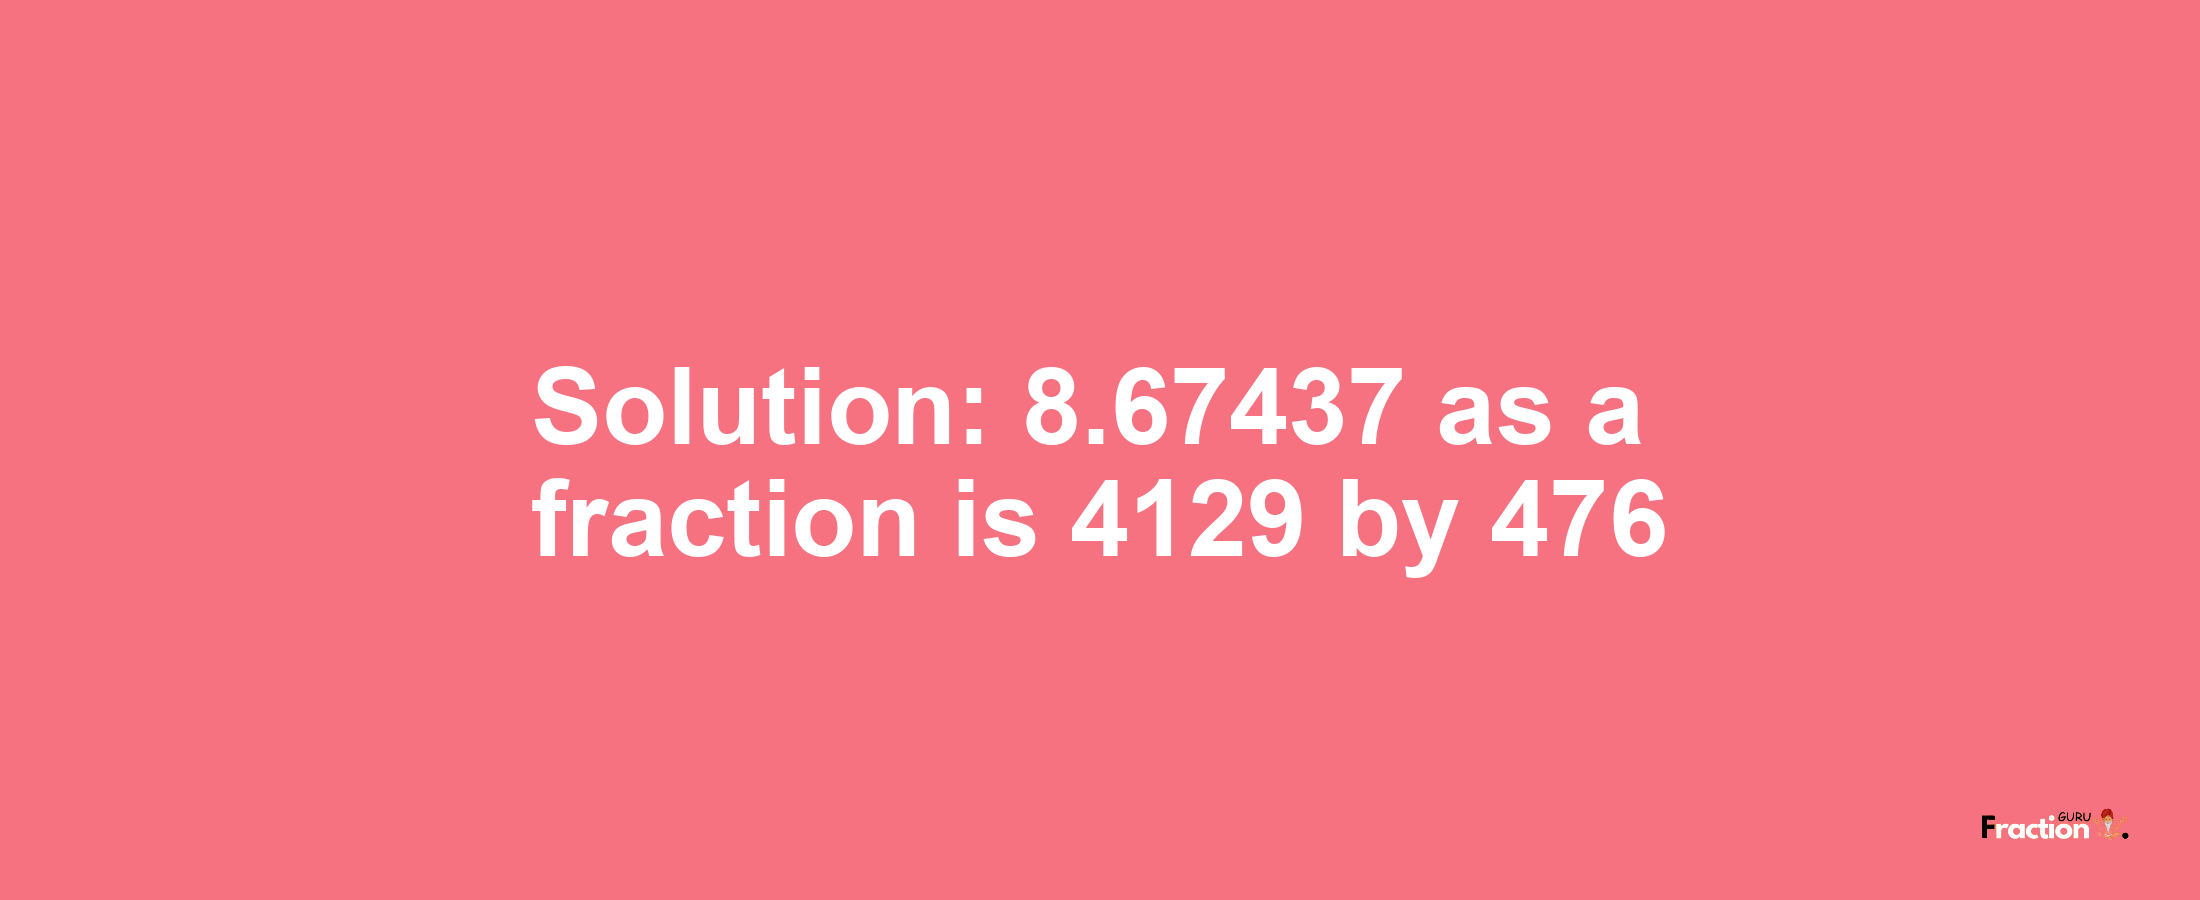 Solution:8.67437 as a fraction is 4129/476